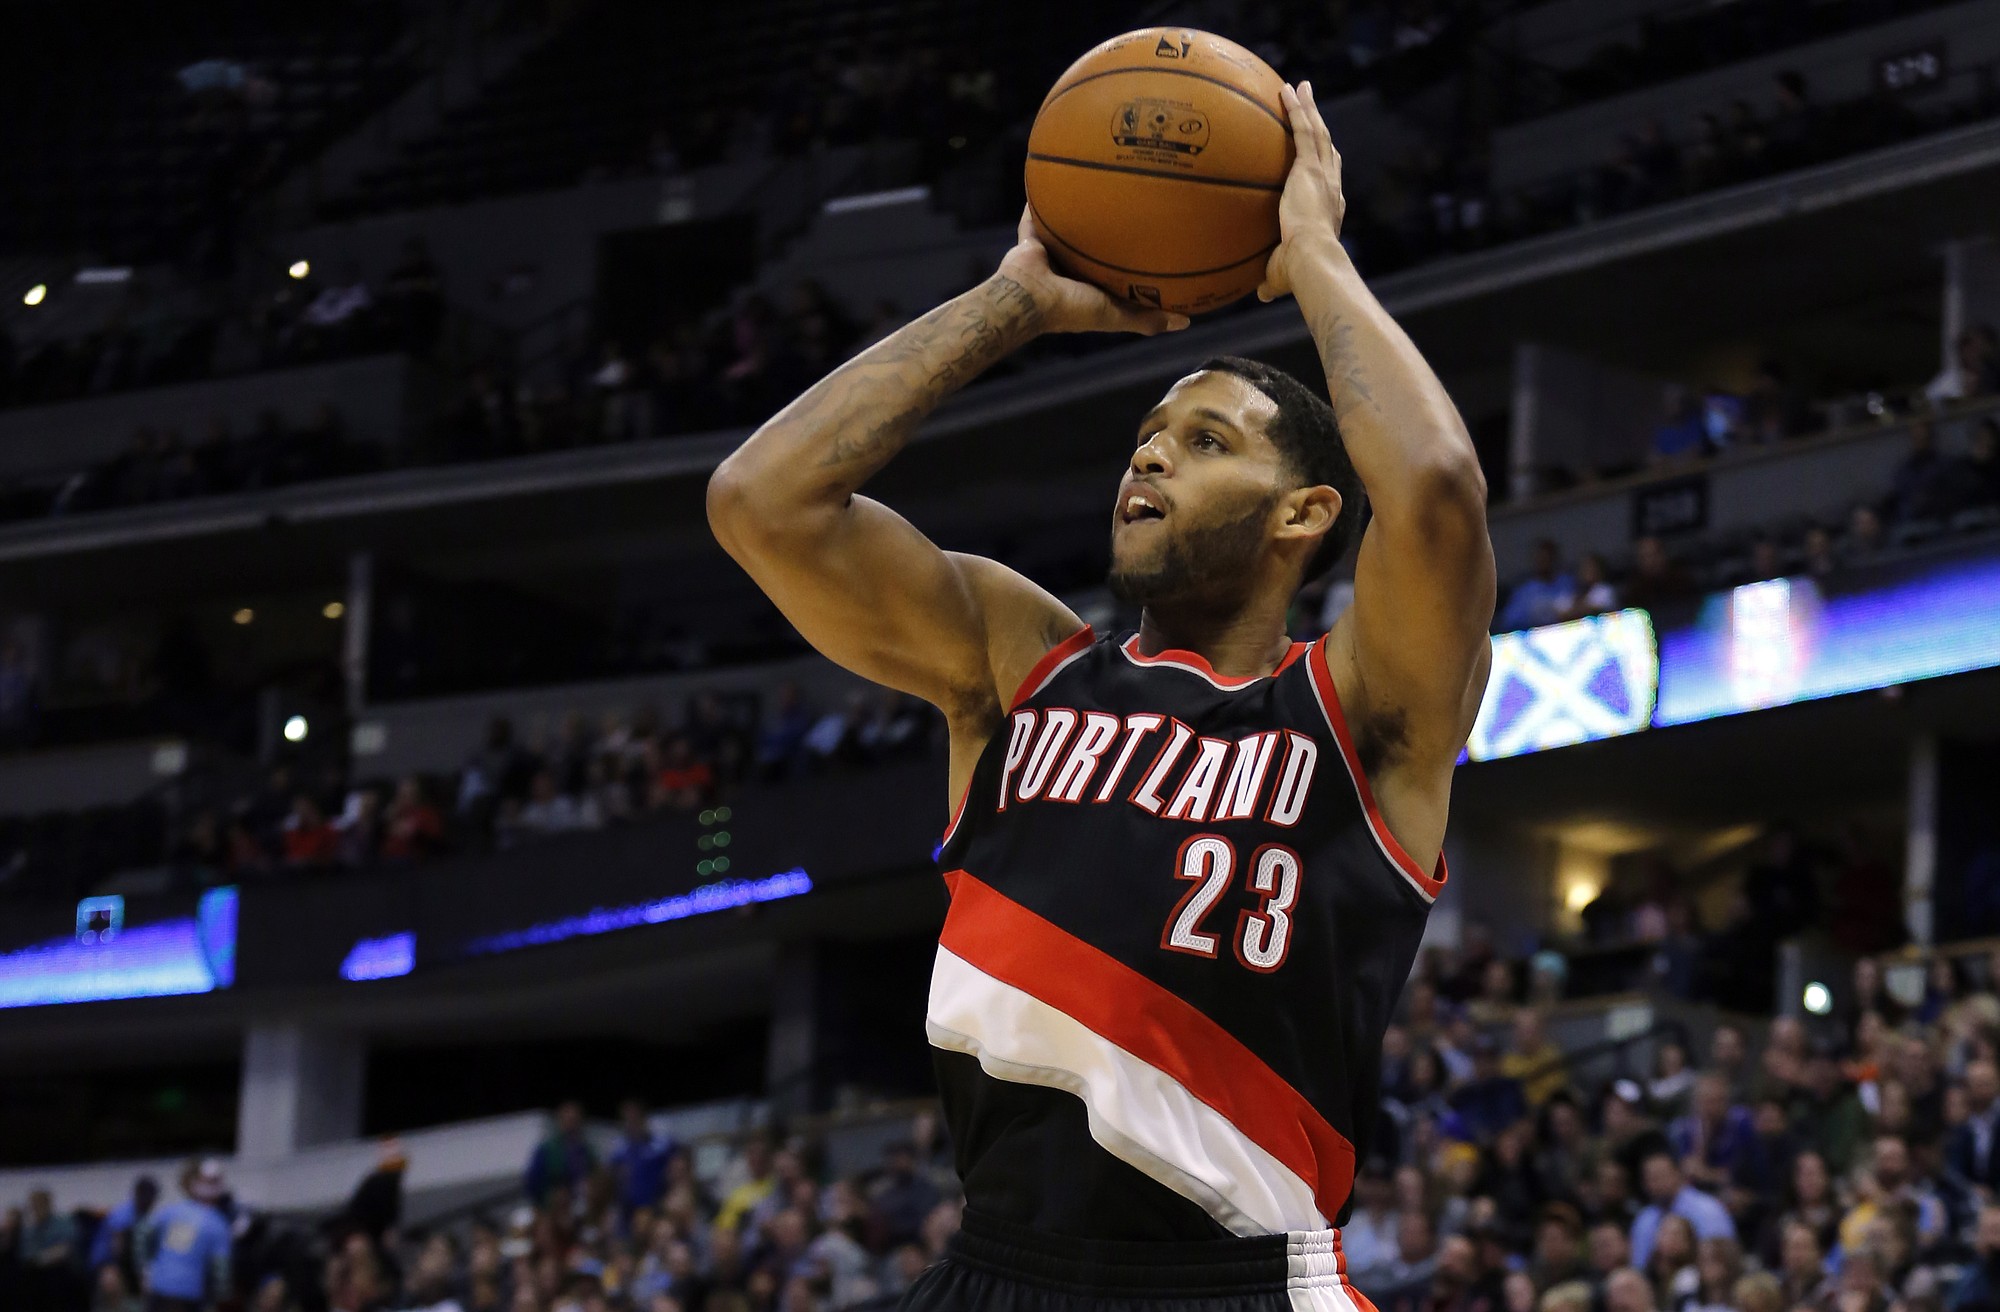 Portland Trail Blazers guard Allen Crabbe has the best chance to show what he can do during the 2015 Las Vegas NBA Summer League.